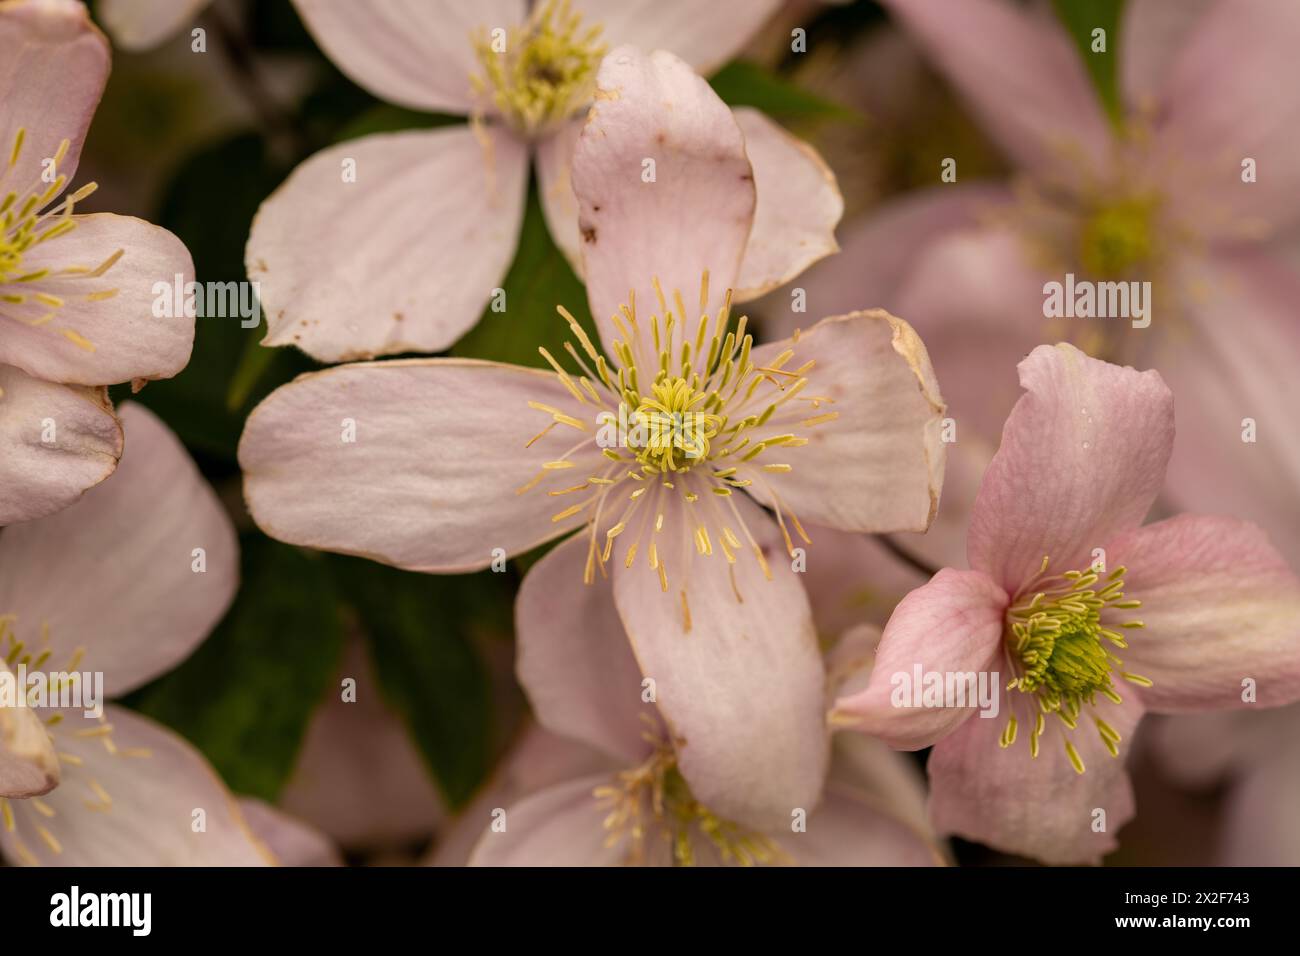 Clematis Montana Mayleen Several flowers filling the image Stock Photo